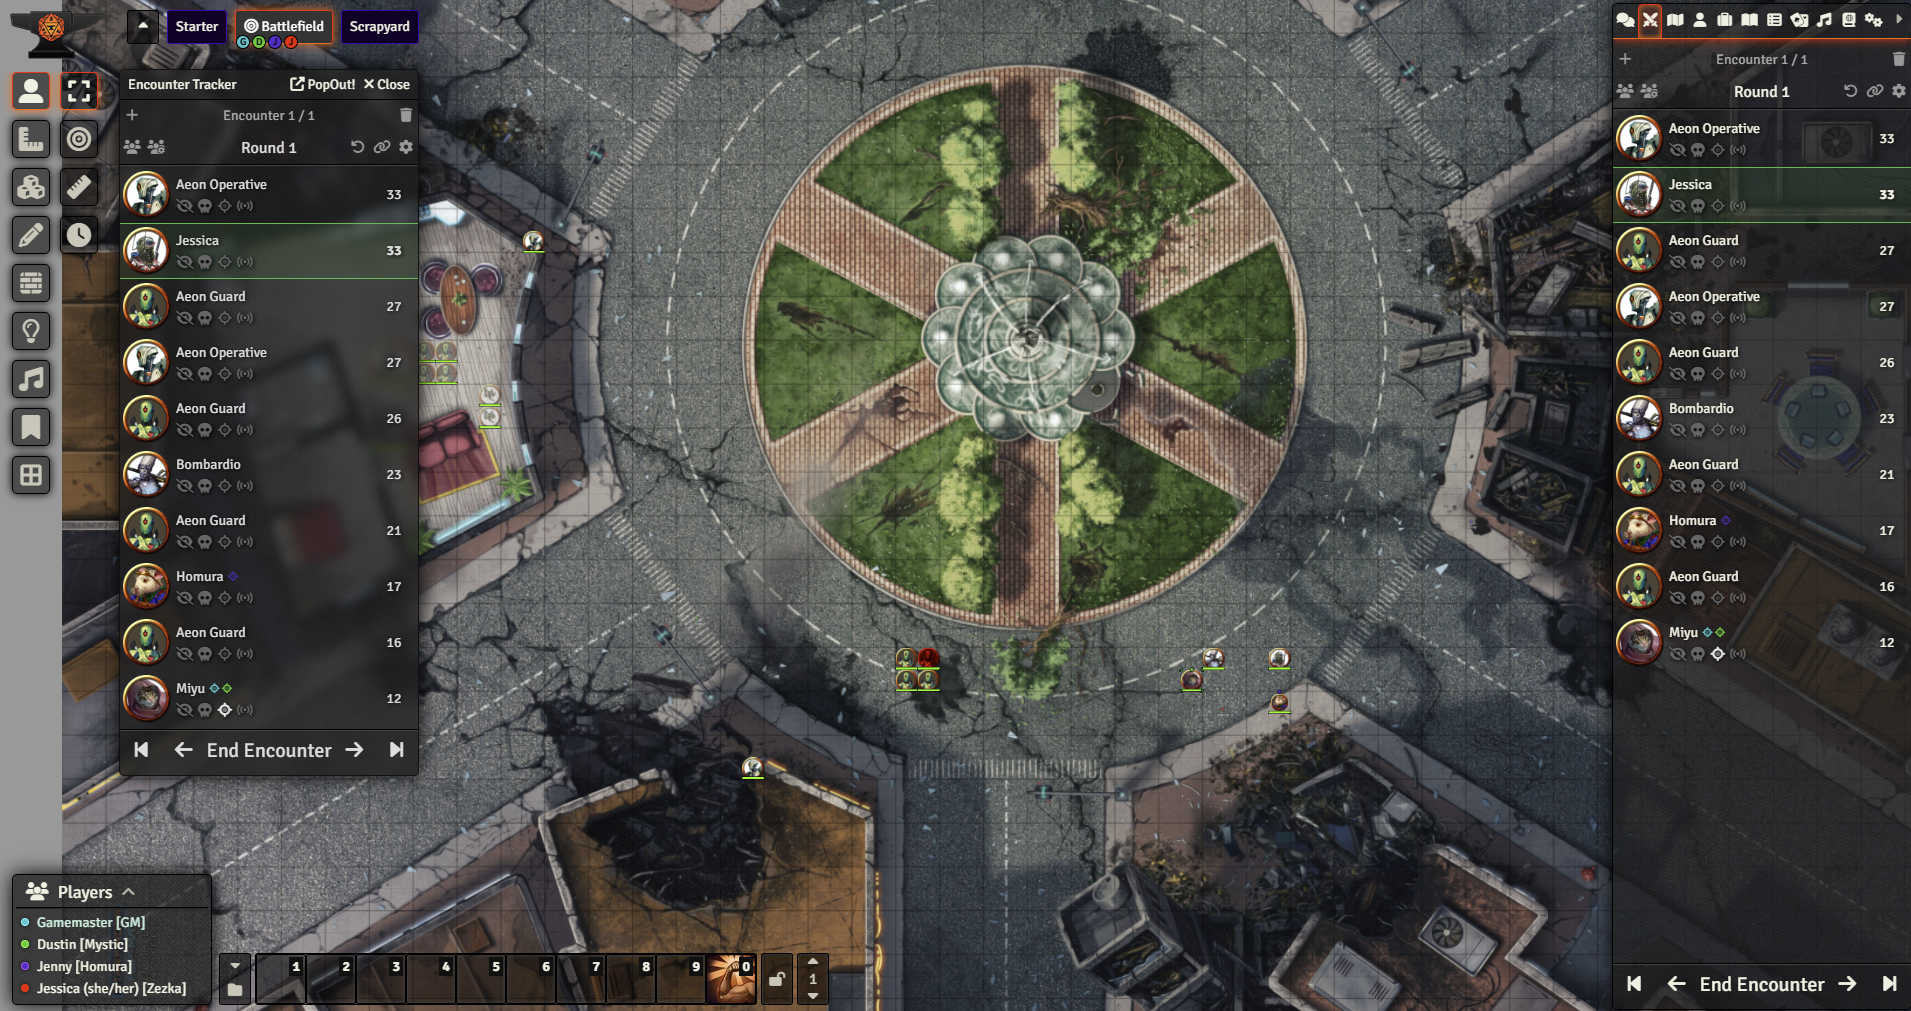 Top down view of virtual tabletop online map of a city square